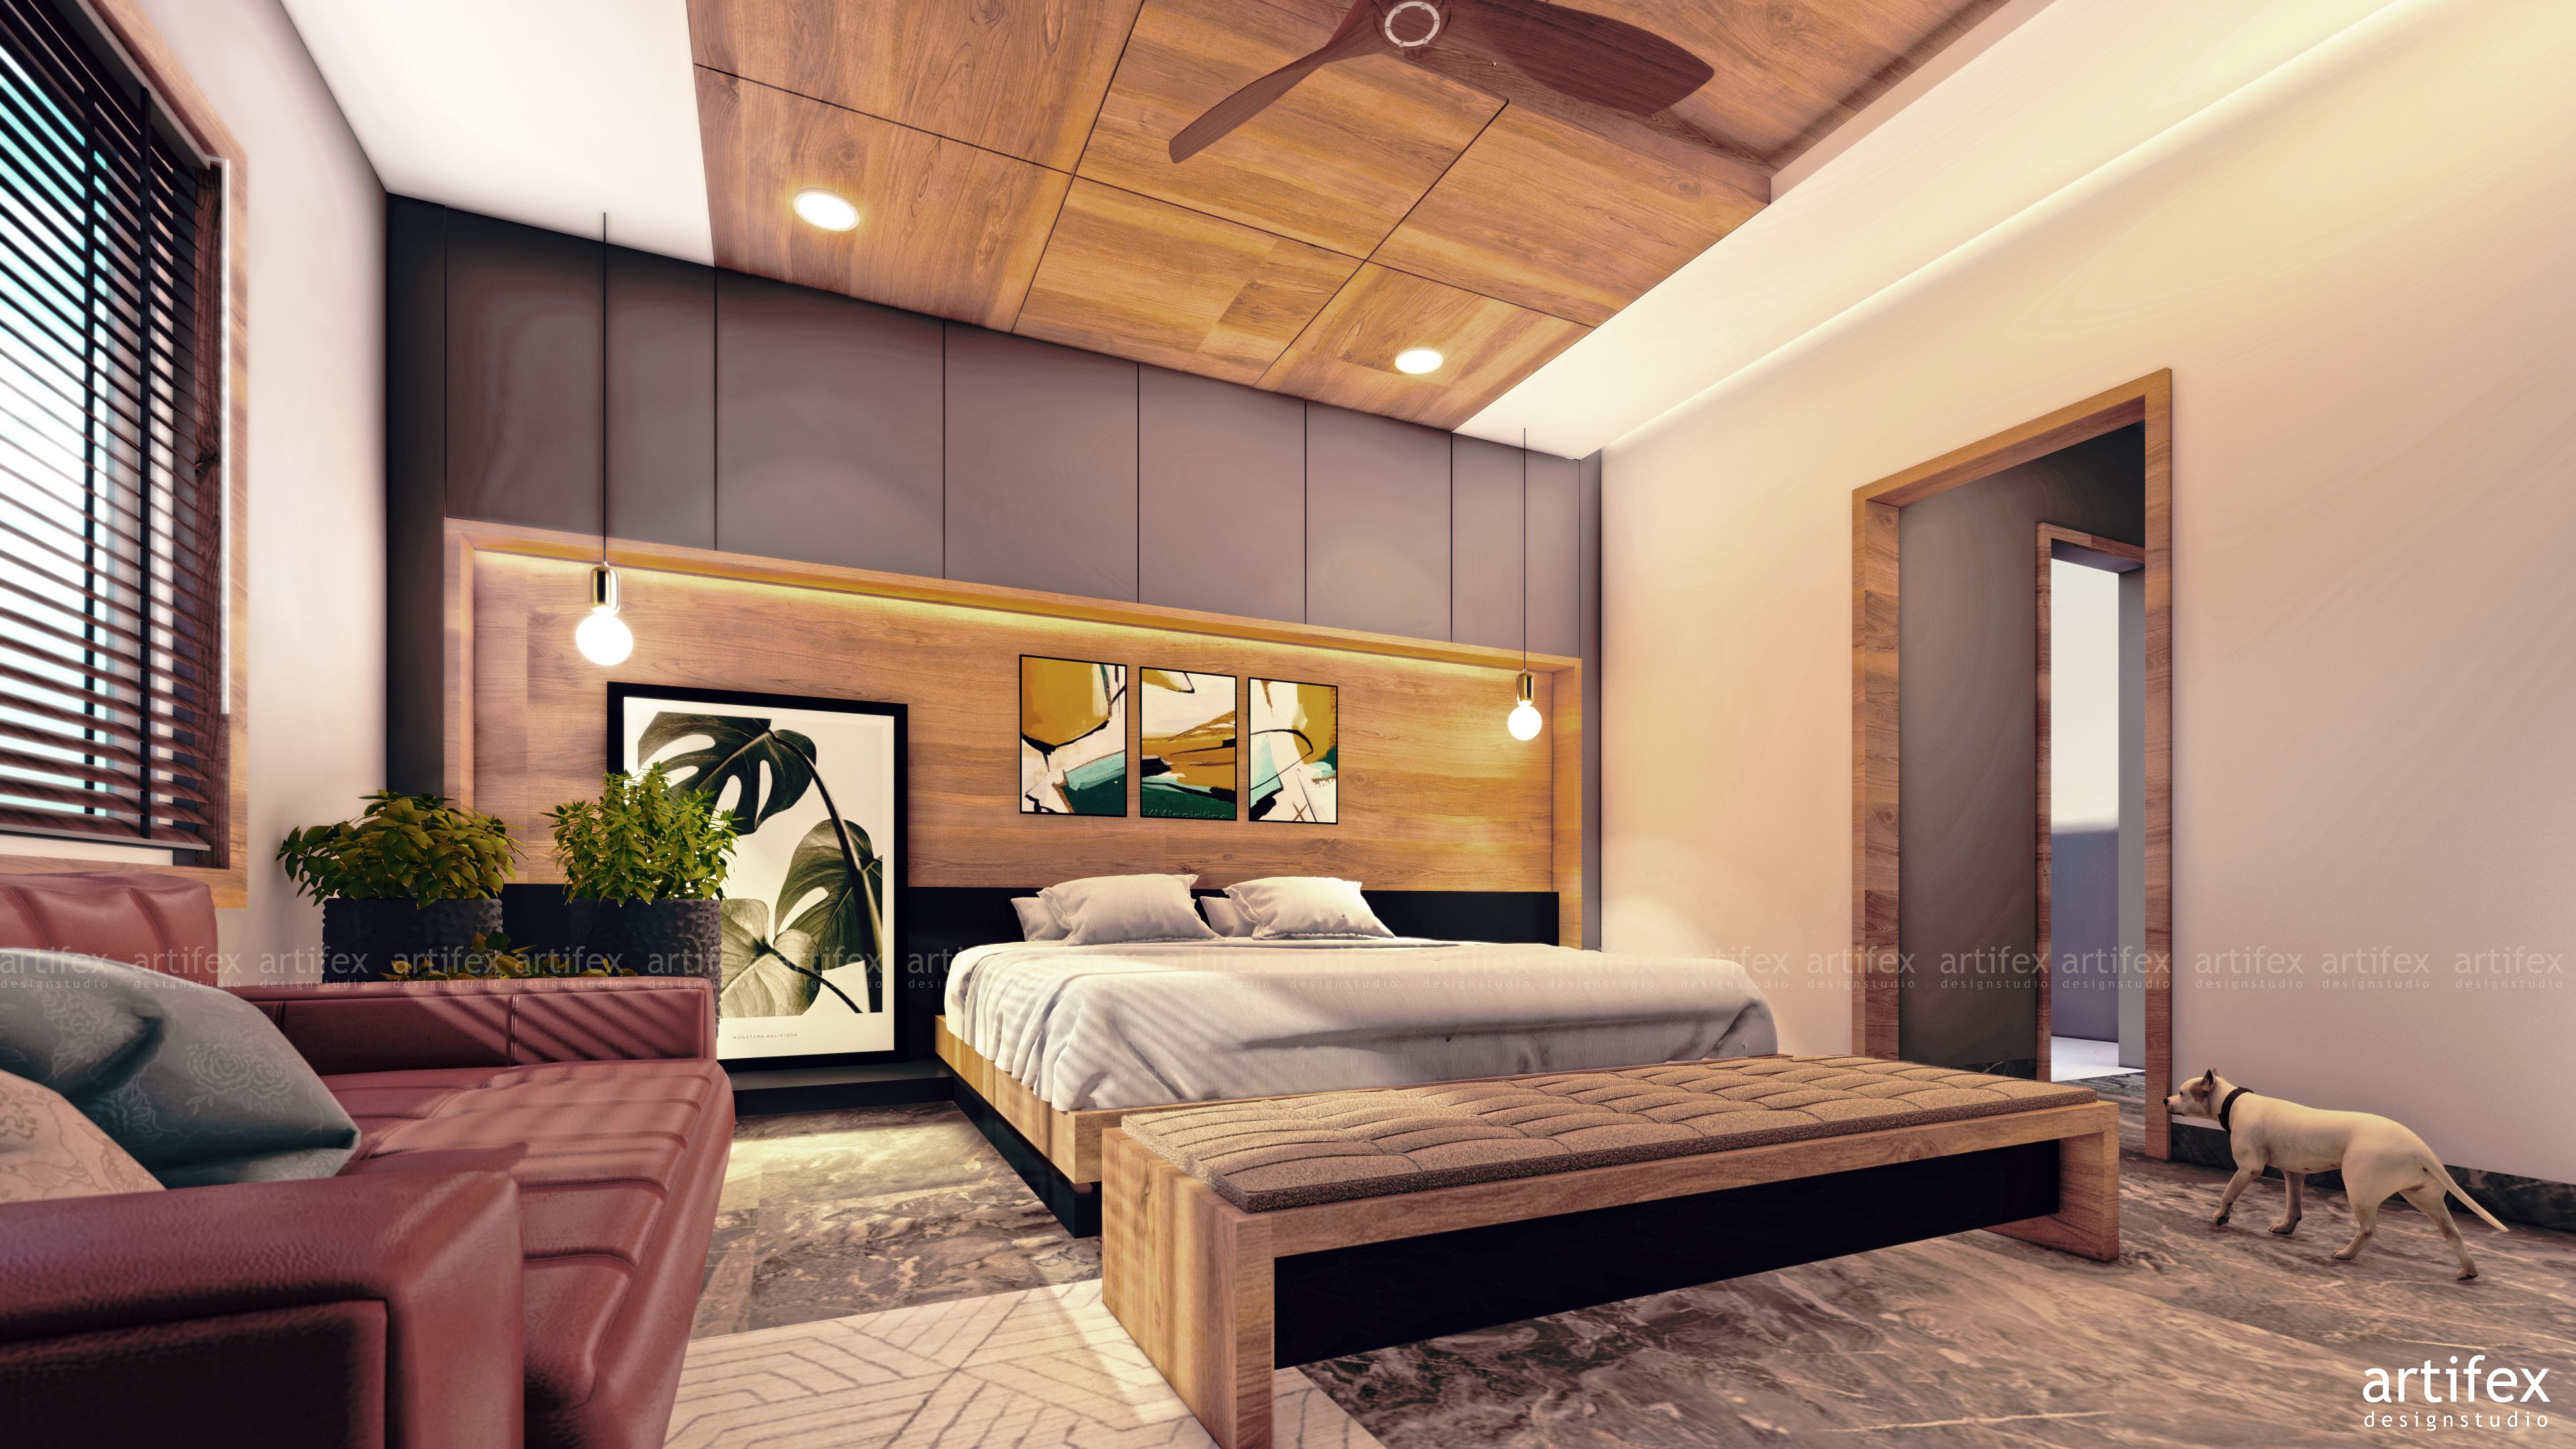 Contemporary Bedroom with Wooden Headboard & Ceiling